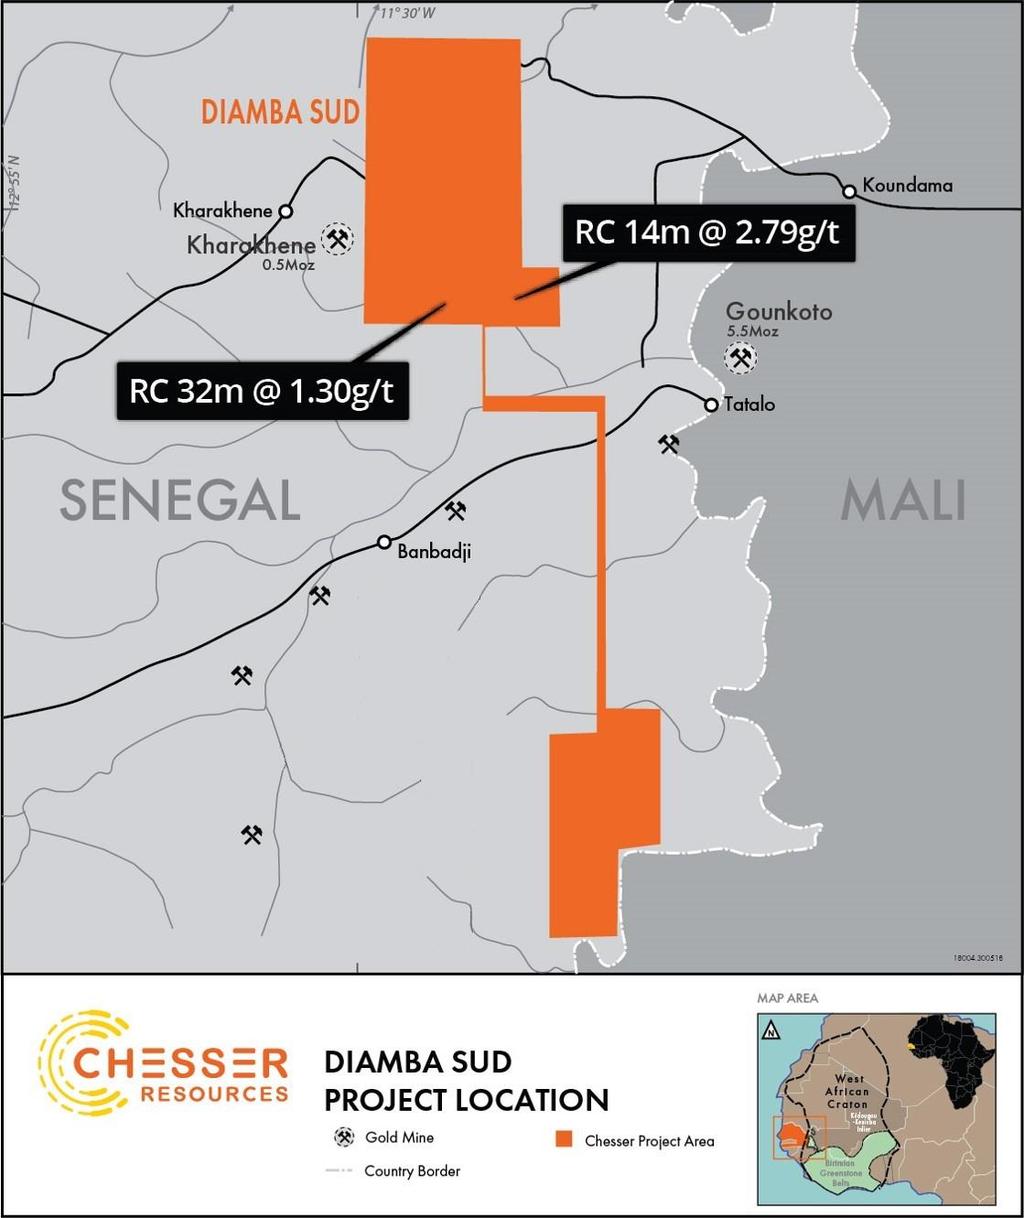 ABOUT DIAMBA SUD Diamba Sud comprises two blocks joined by a narrow strip, located near the Mali-Senegal shear zone and proximal to numerous existing gold mines and deposits (Figure 3).